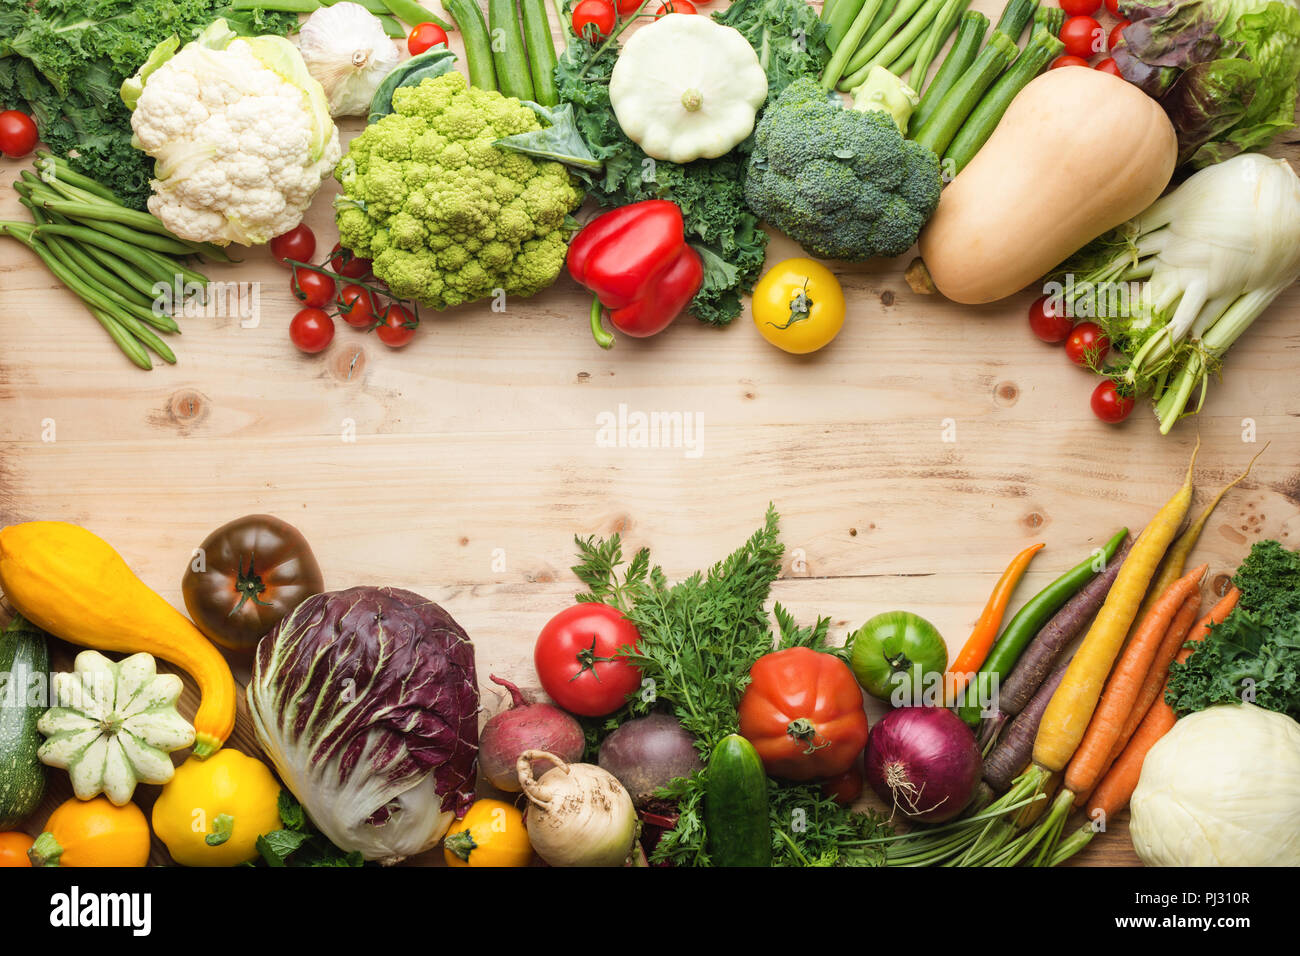 https://c8.alamy.com/comp/PJ310R/fresh-farm-produce-organic-vegetables-and-herbs-on-pine-wooden-table-healthy-background-copy-space-for-text-in-the-middle-top-view-selective-focus-PJ310R.jpg